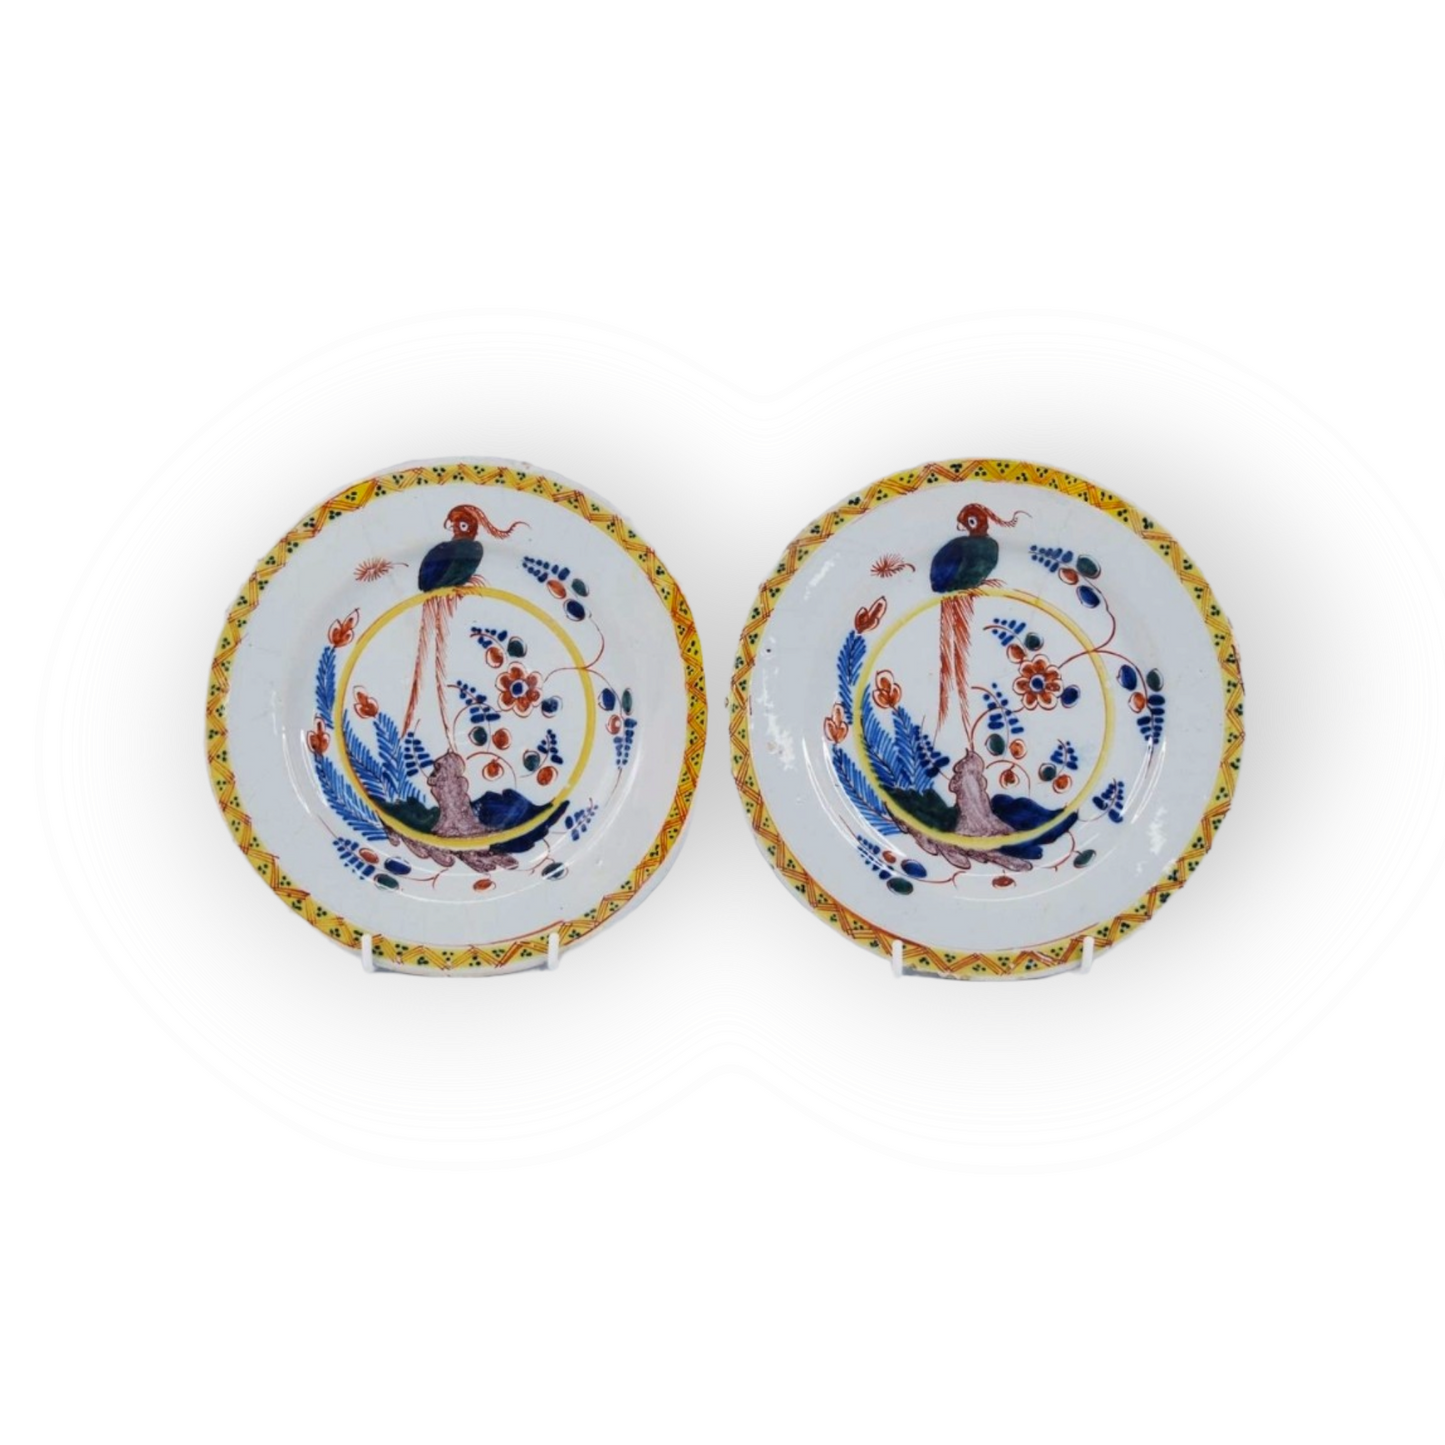 A pair of early 18th Century English antique polychrome delftware plates, attributed to Norfolk House Pottery, Lambeth, London, circa 1730